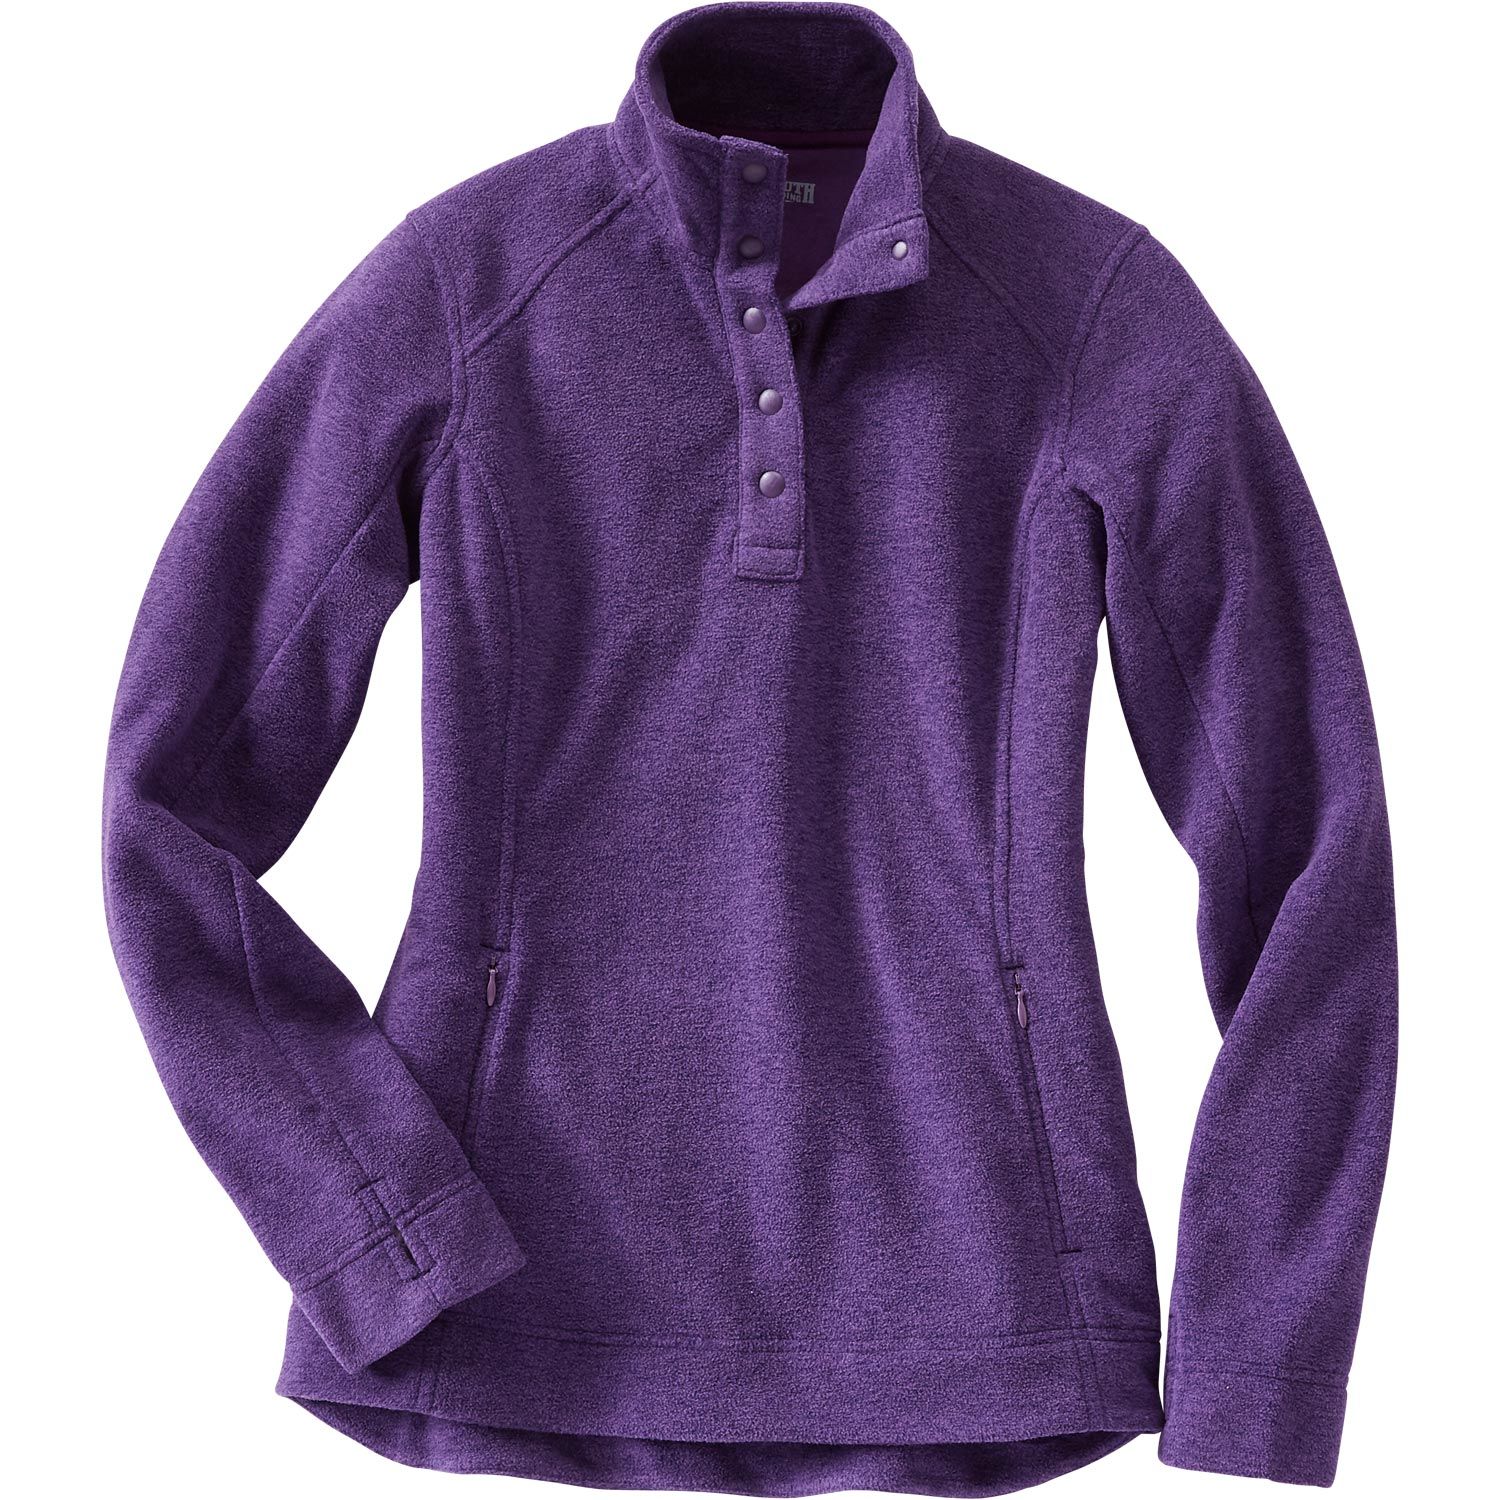 Women's Frost Lake Fleece Pullover | Duluth Trading Company